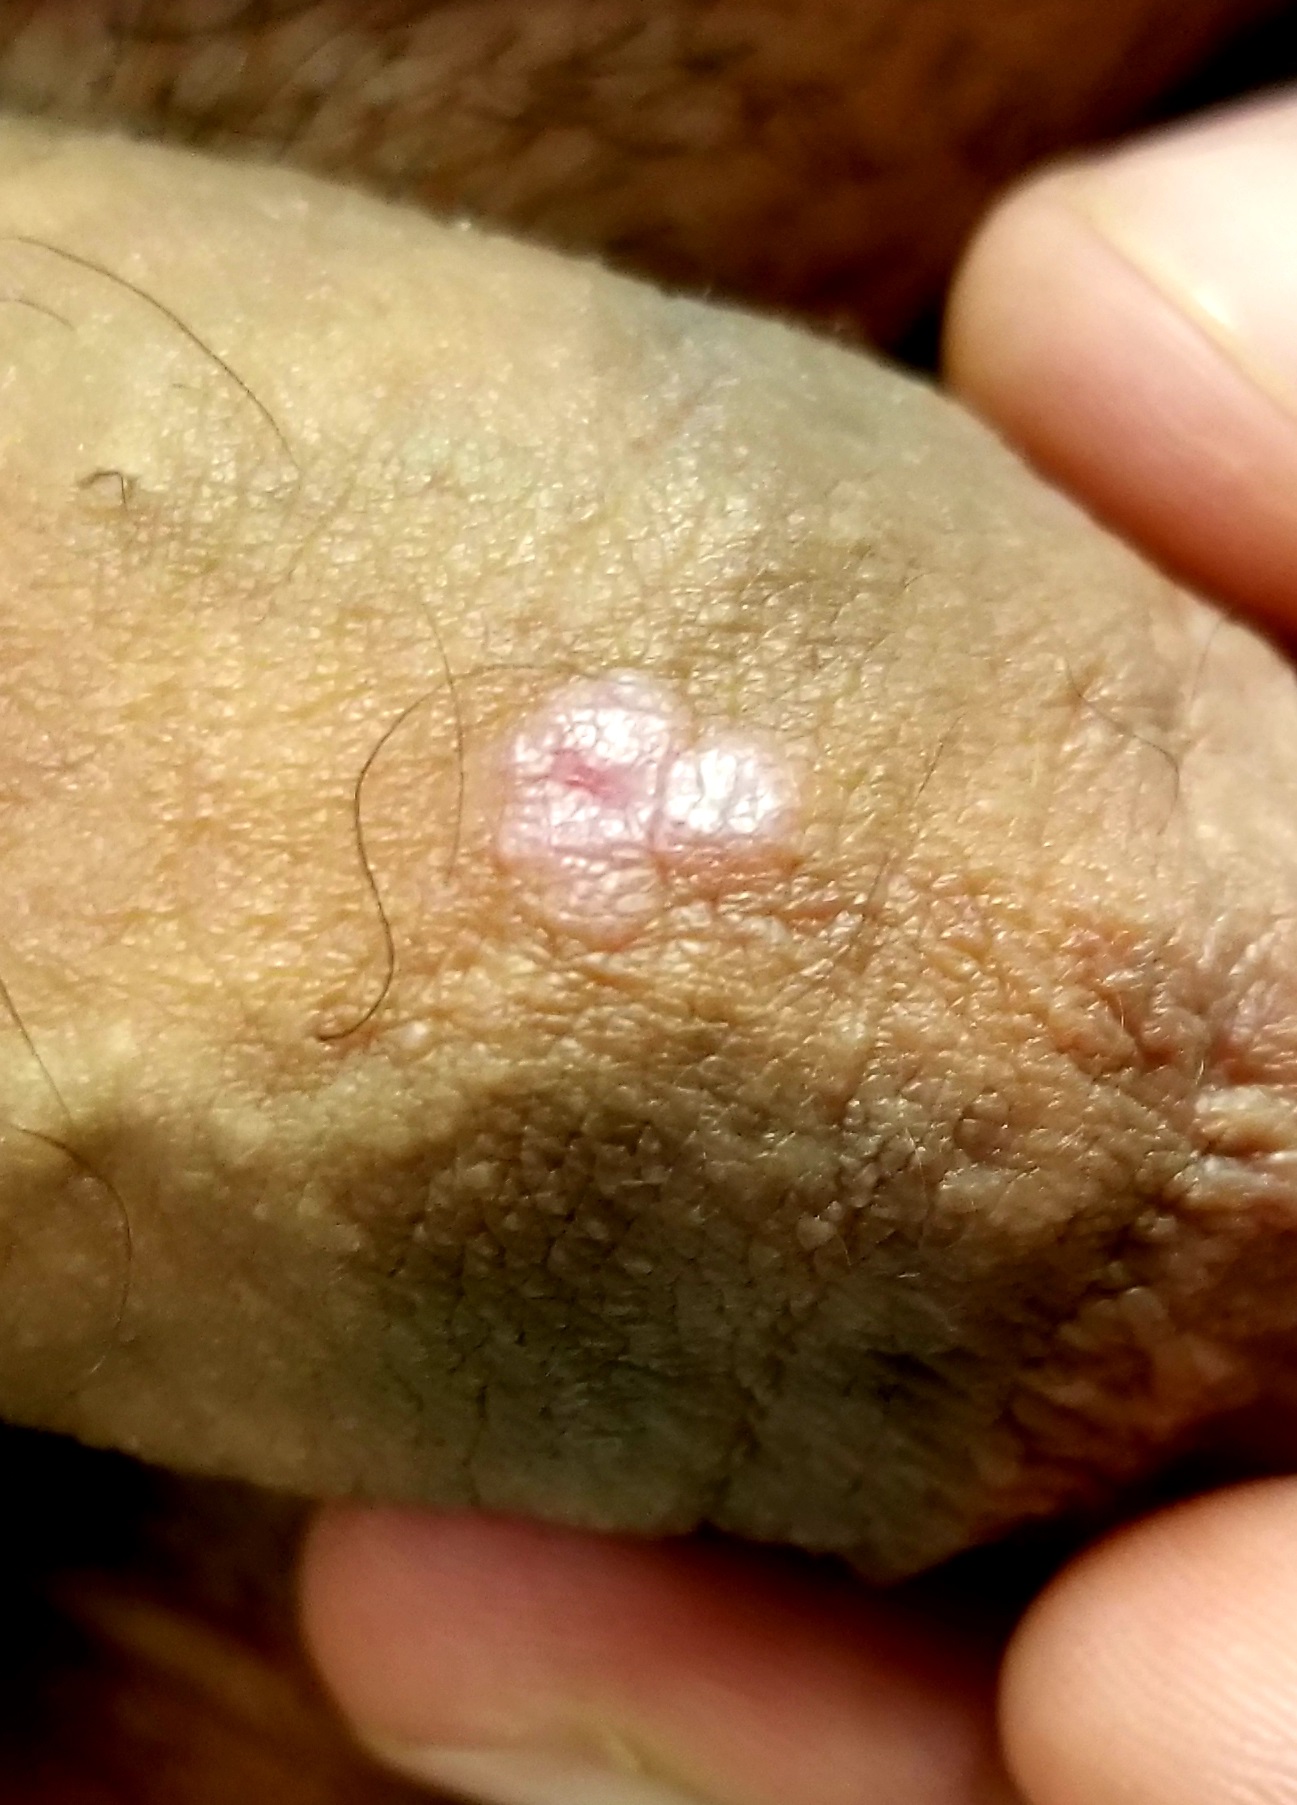 Hpv warts elbow Warts on hands and knees Hpv virus warts on elbow